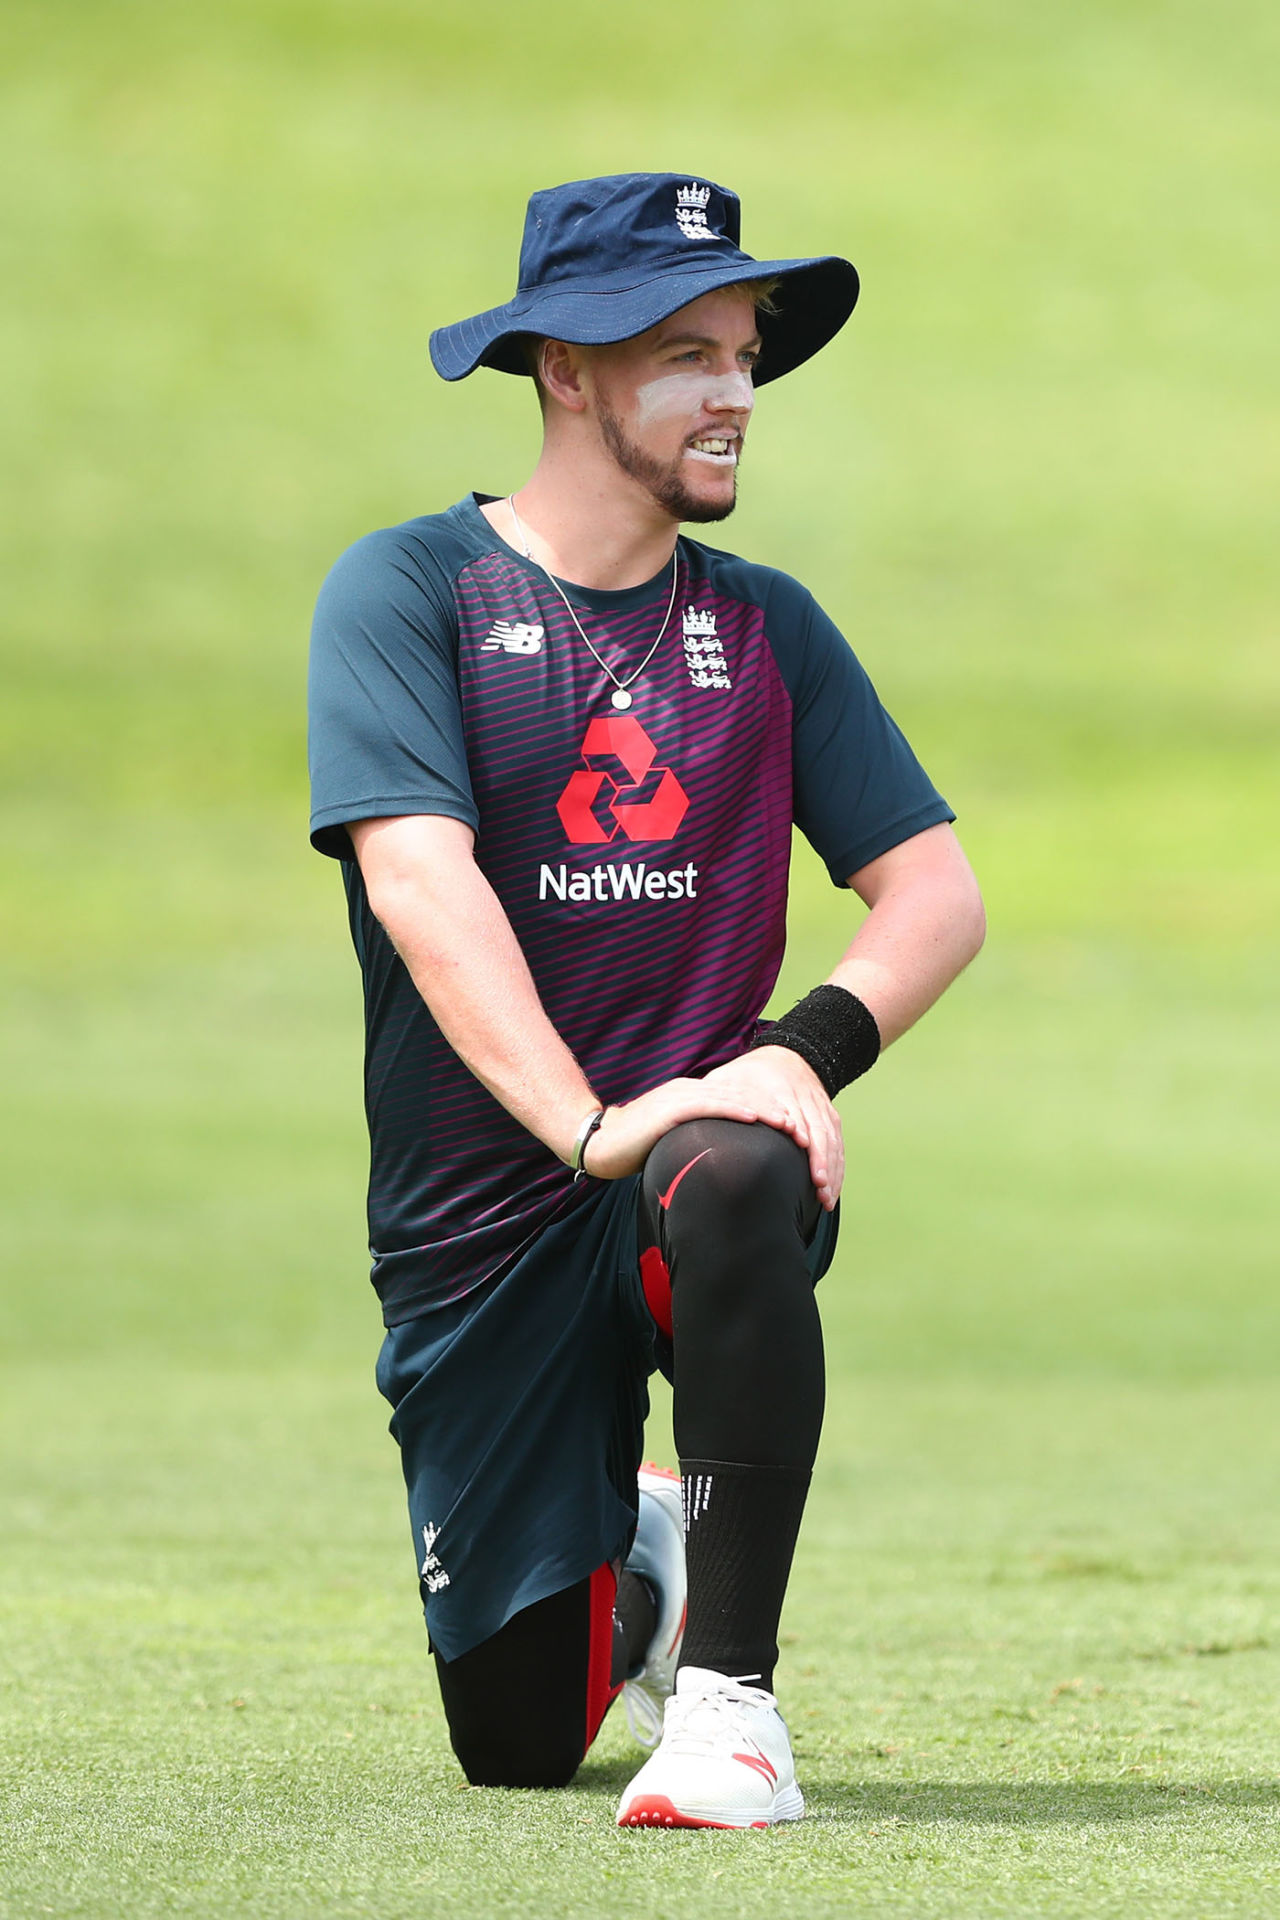 Tom Moores during an England Lions training session at Allan Border Field, Brisbane, January 27, 2020